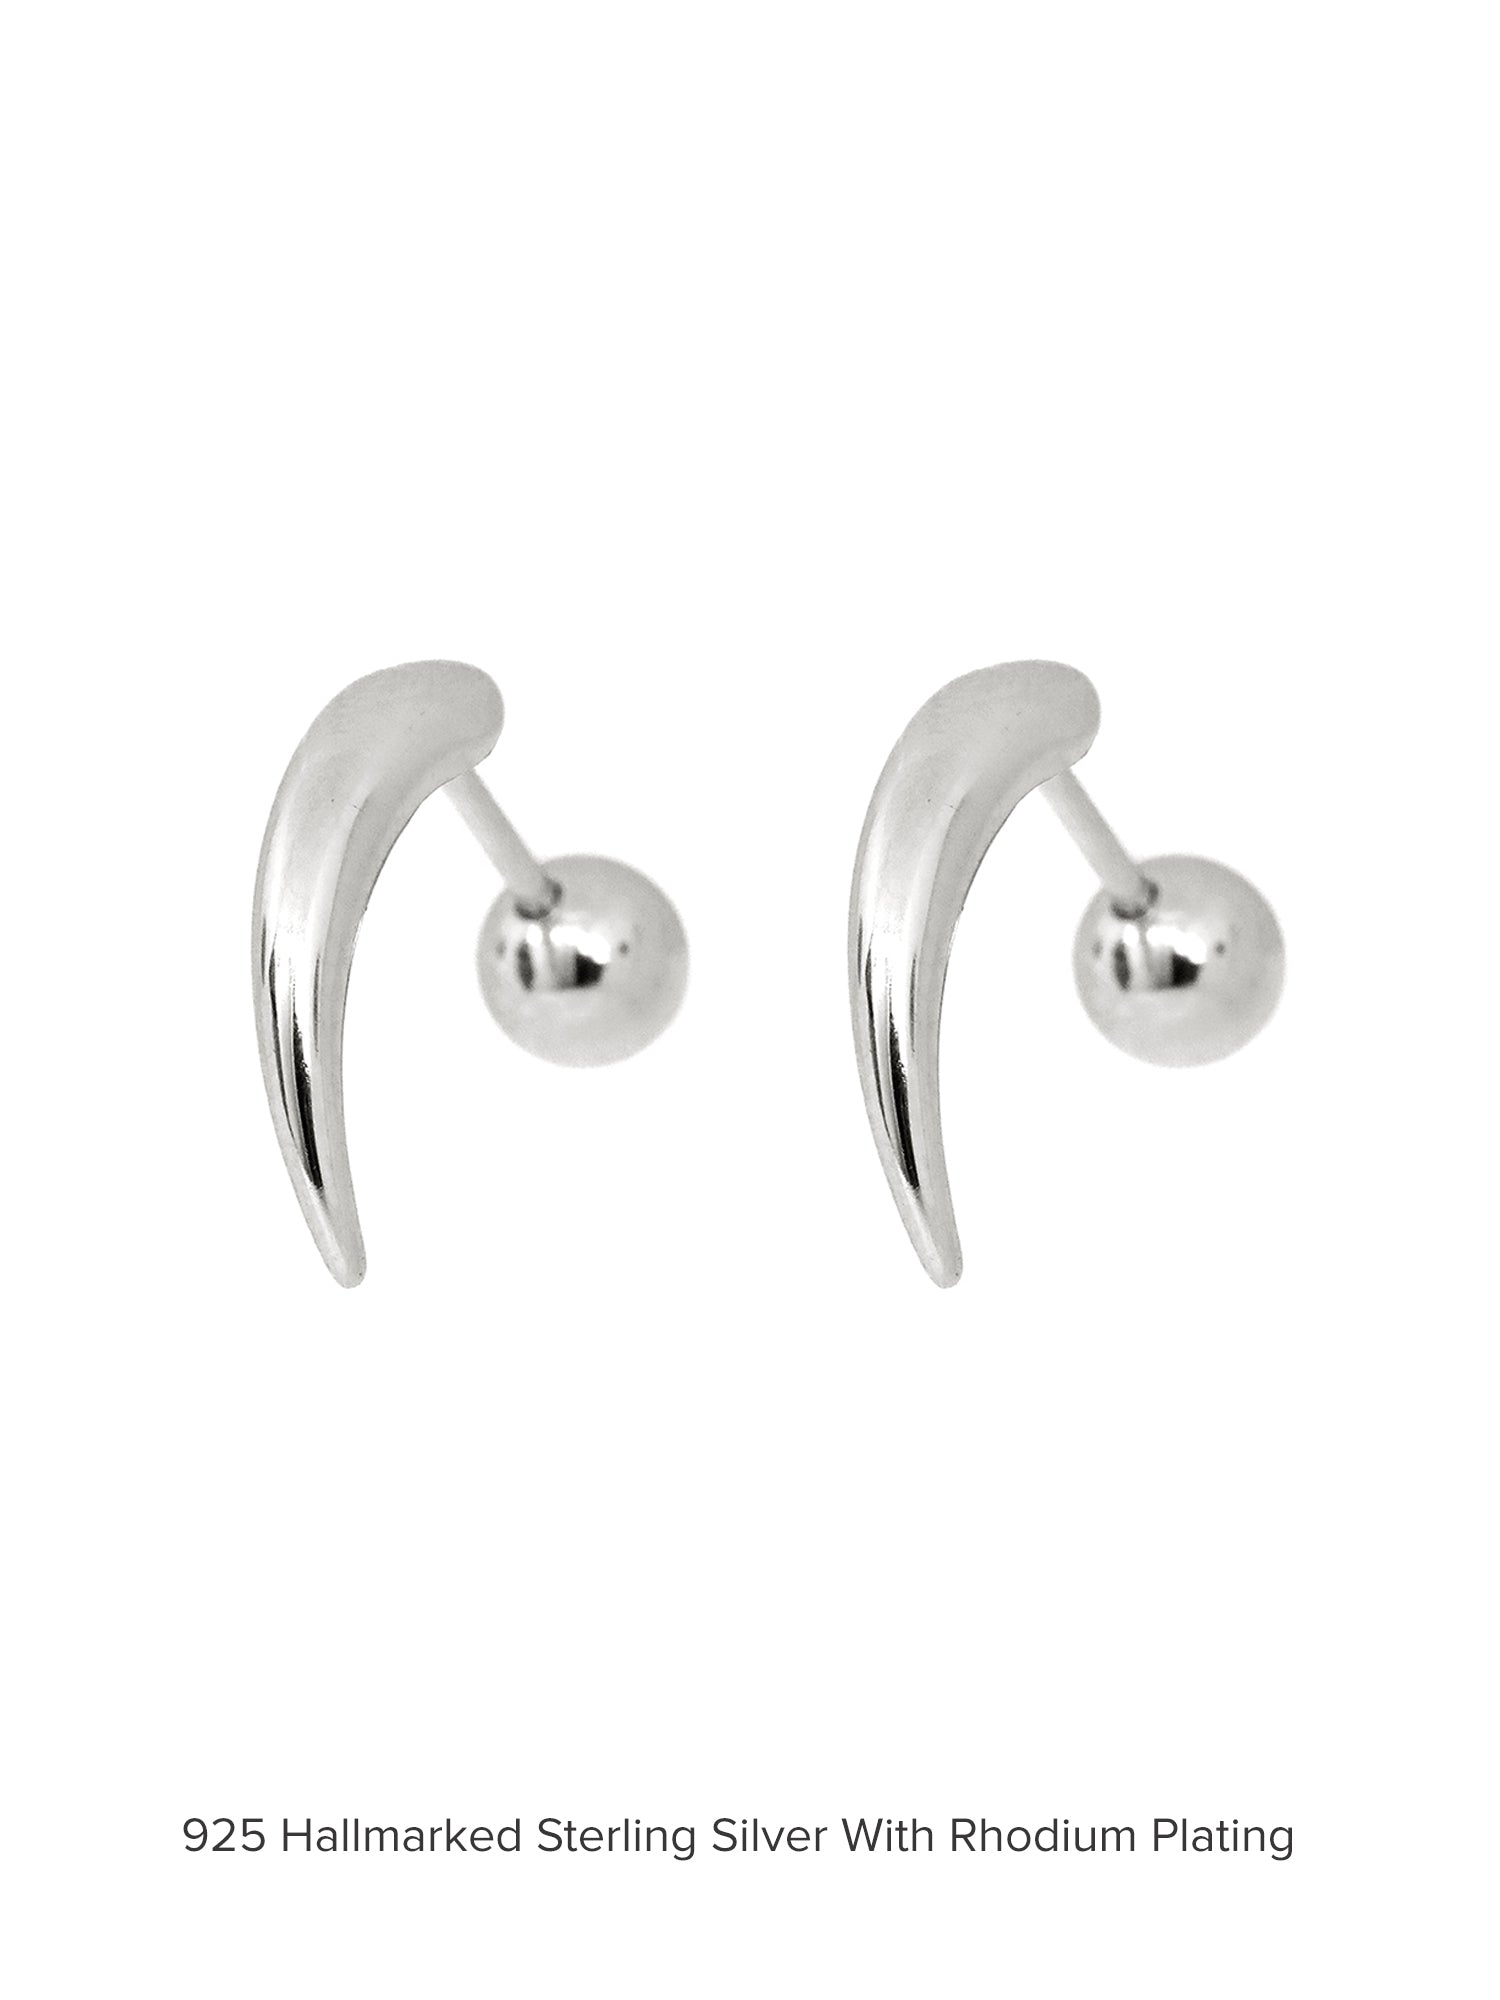 TWO WAY CURVED HORN EARRINGS IN PURE 925 SILVER